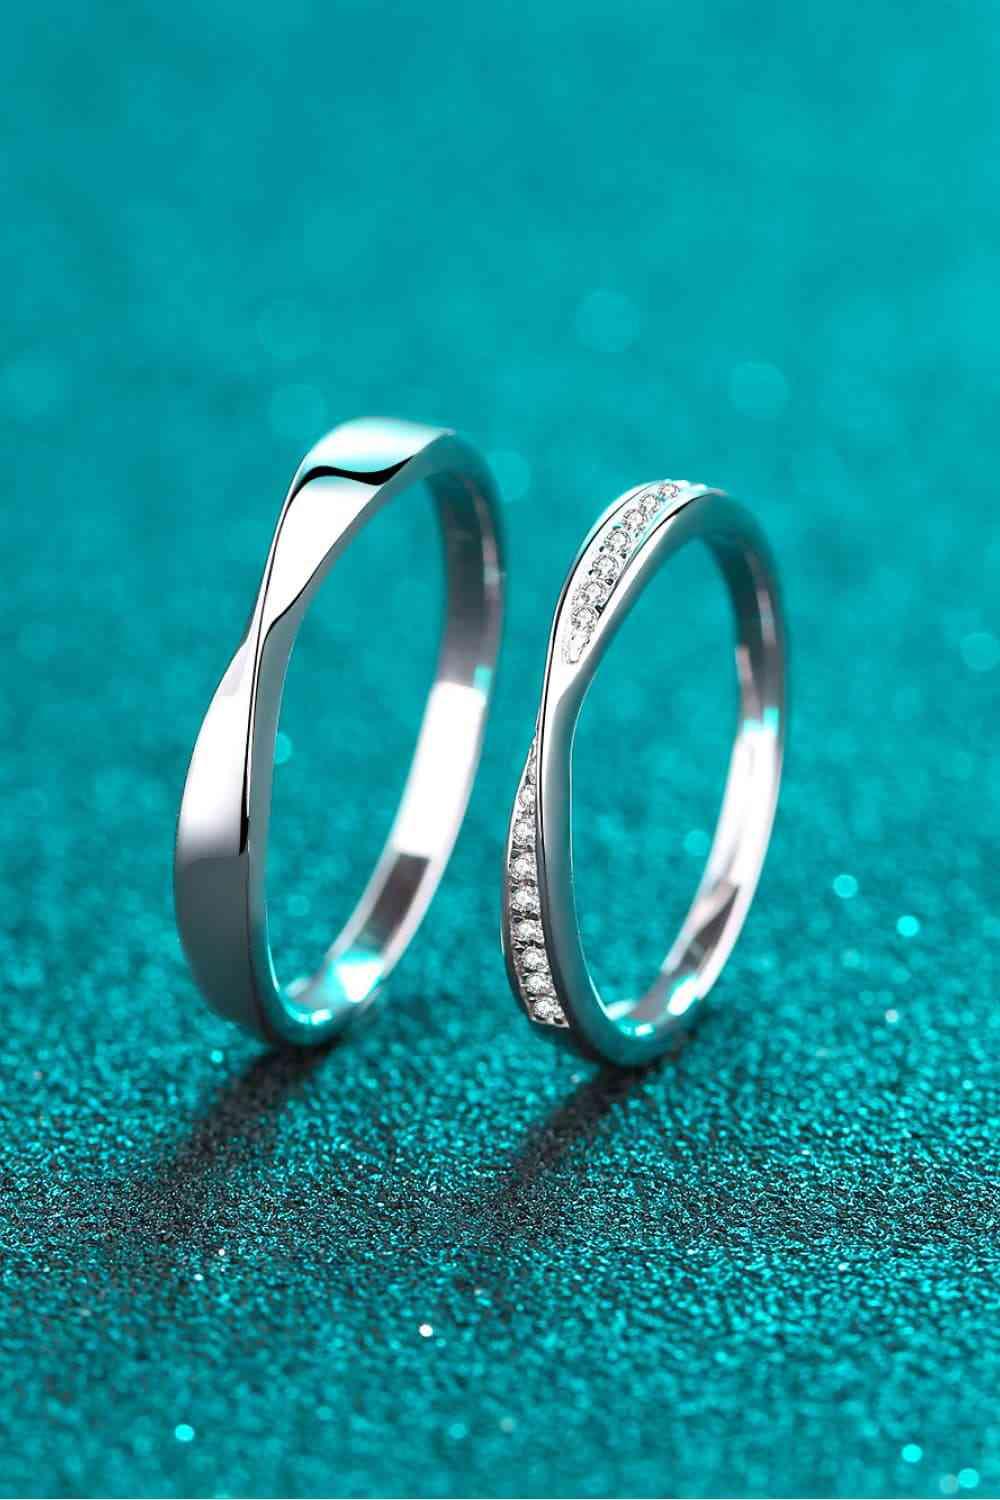 Minimalist 925 Sterling Silver Matching Ring Set - God's Girl Gifts And Apparel